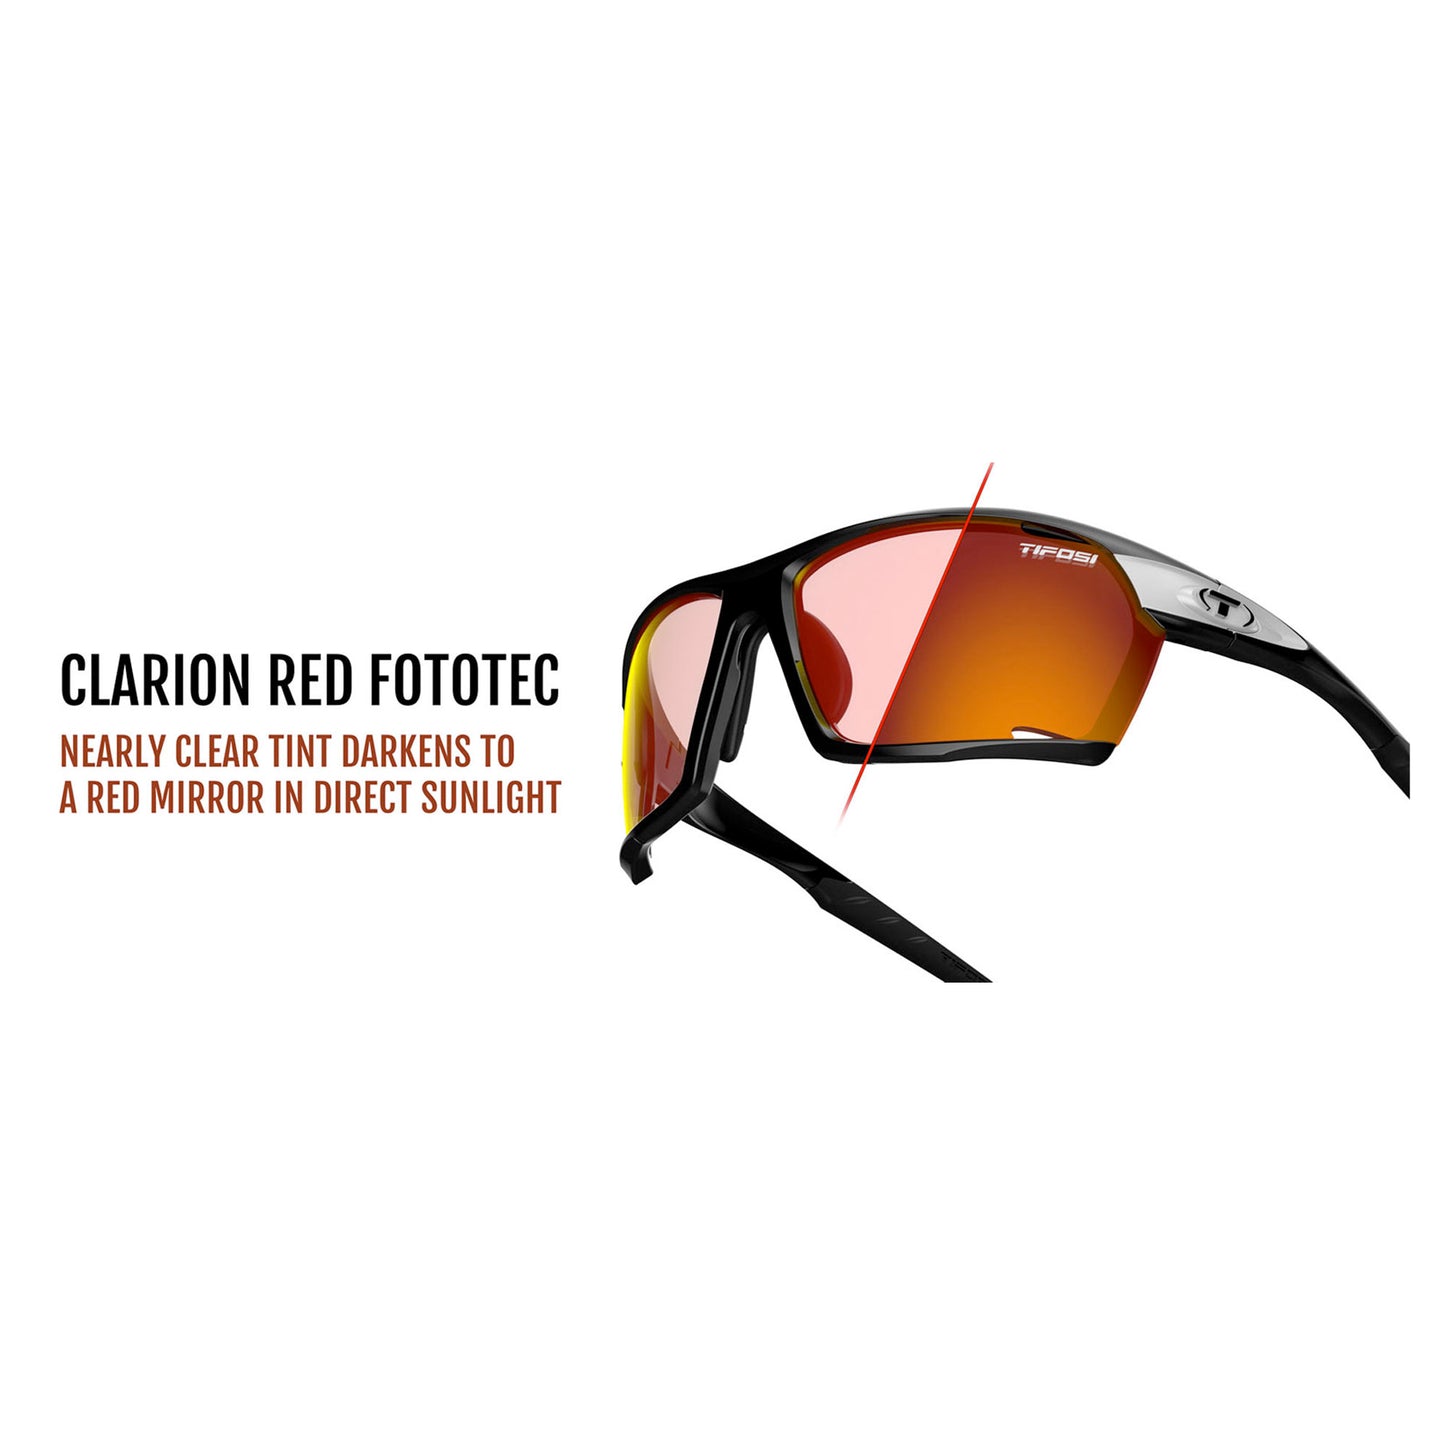 Tifosi Kilo Cycling Sunglasses, Black/White With Clarion Red Fototec Lens